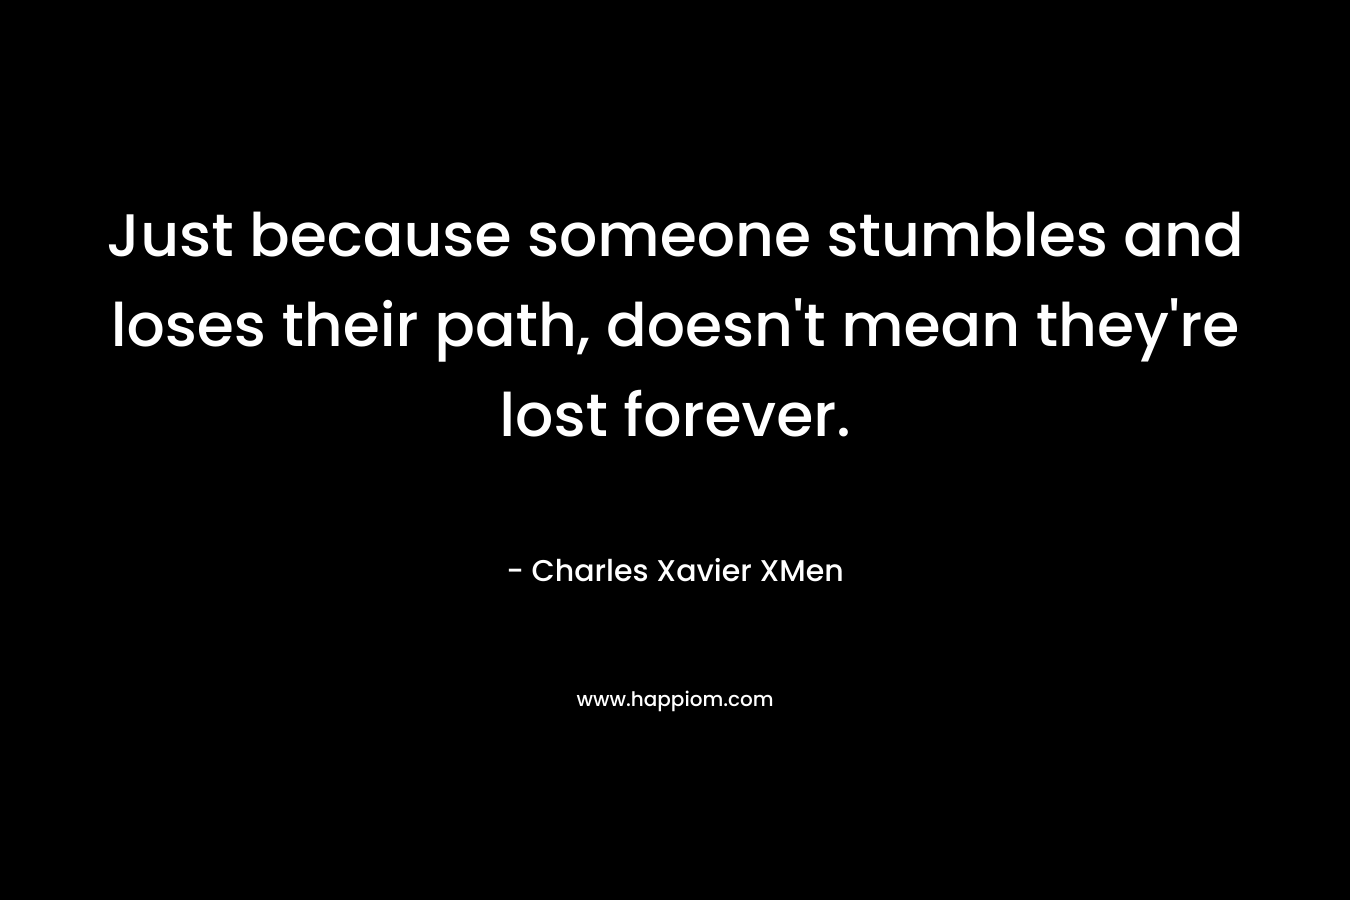 Just because someone stumbles and loses their path, doesn't mean they're lost forever.